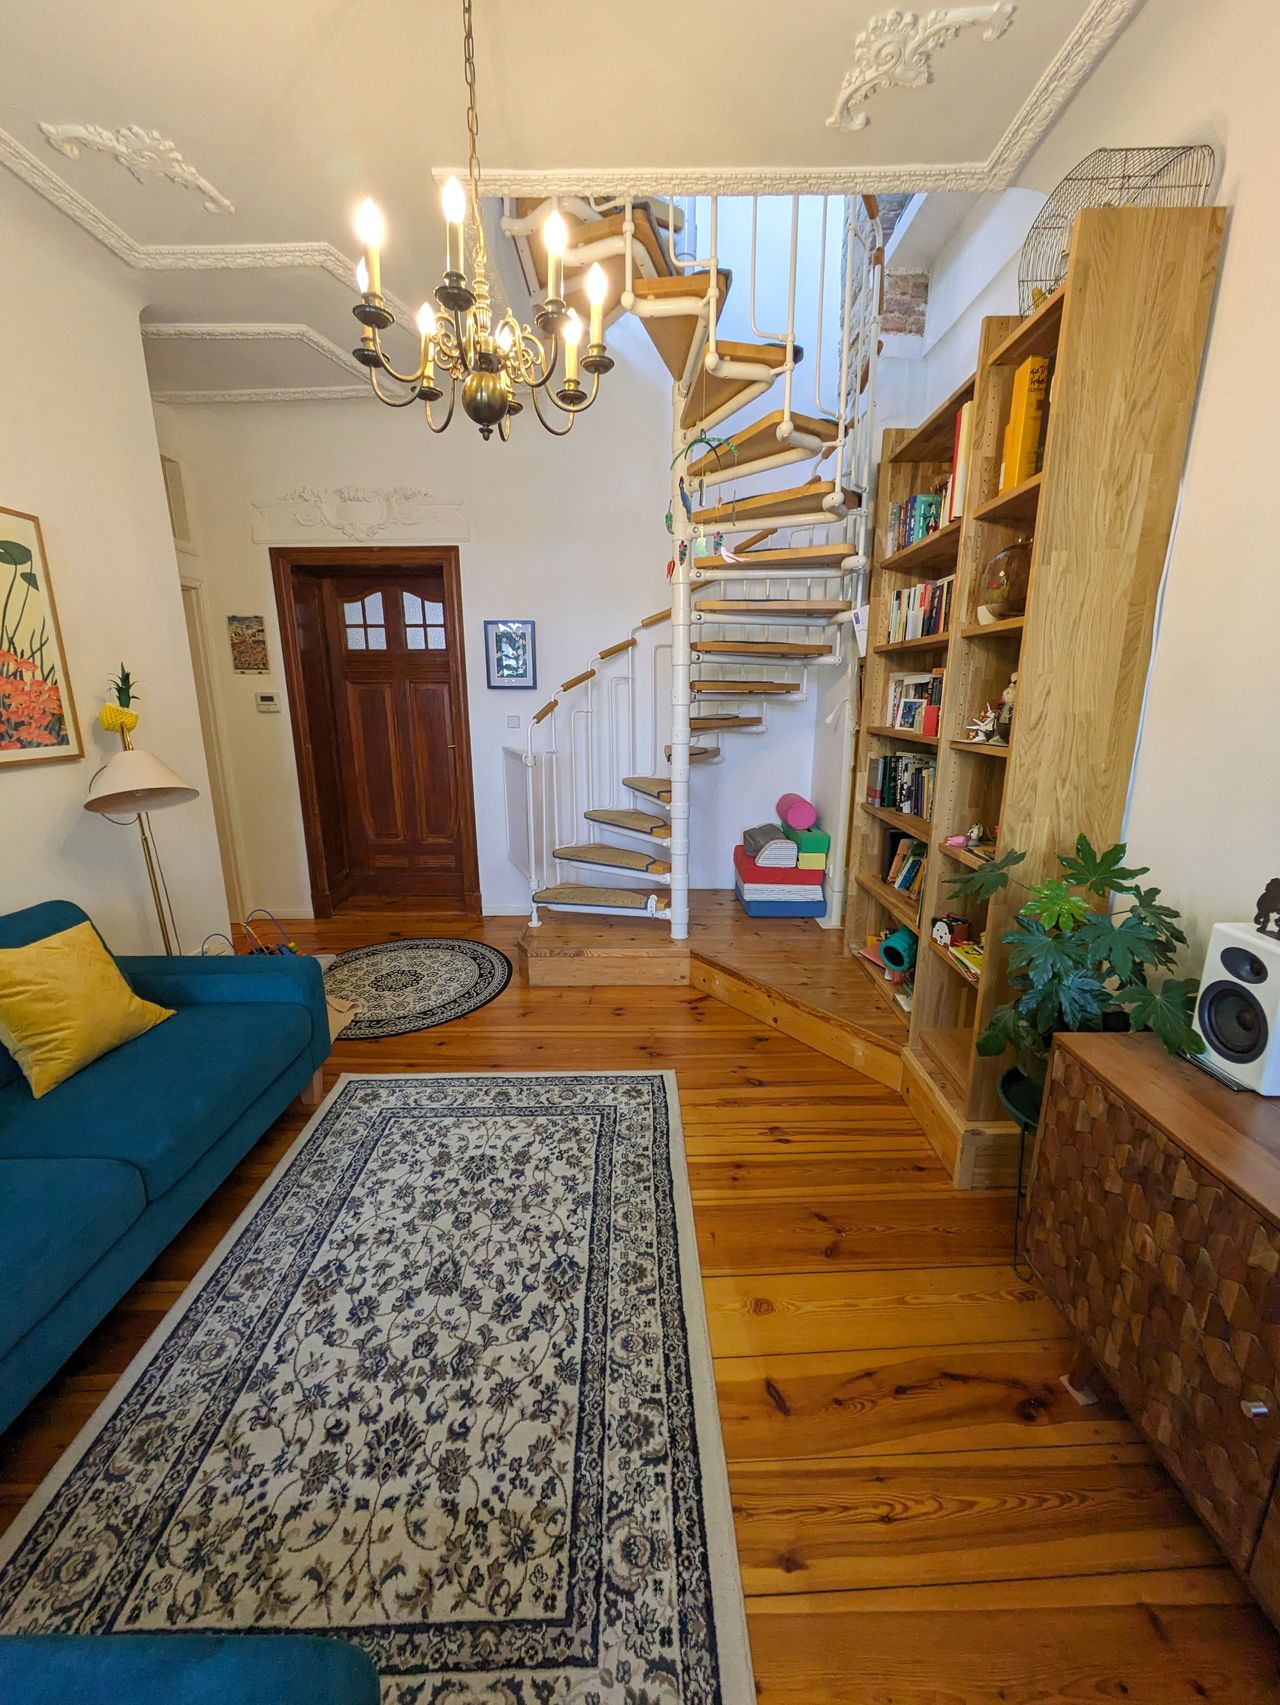 Beautiful maisonette family home in central location close to the river Spree and Tiergarten park.